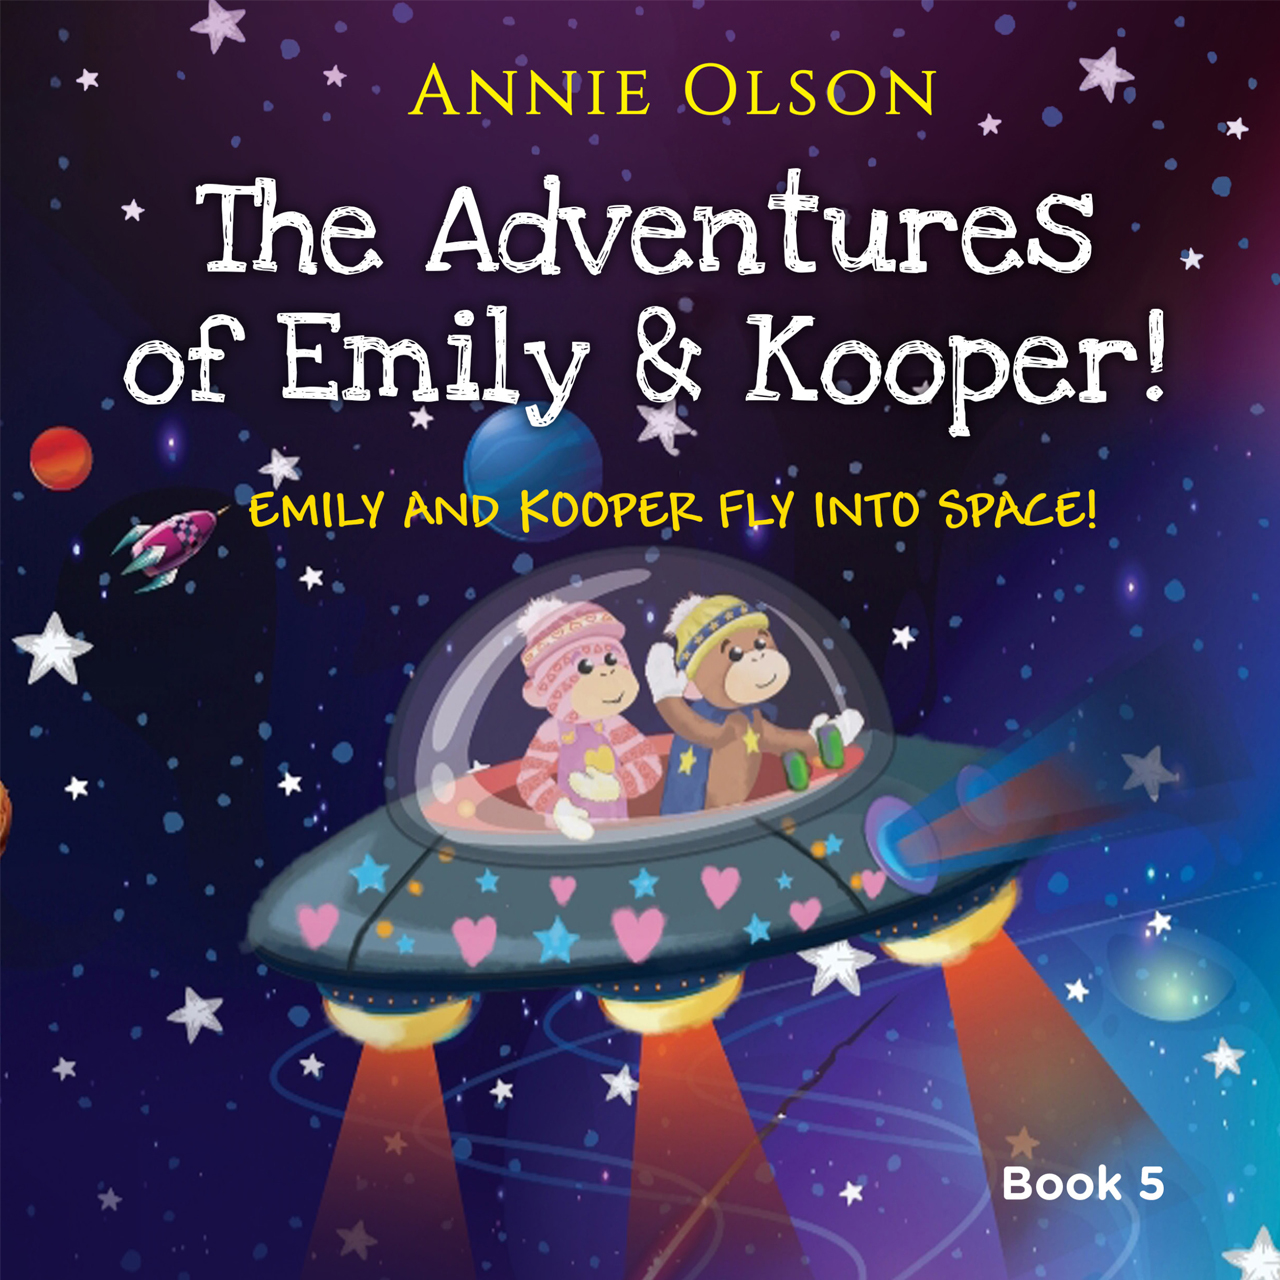 Emily and Kooper fly into Space